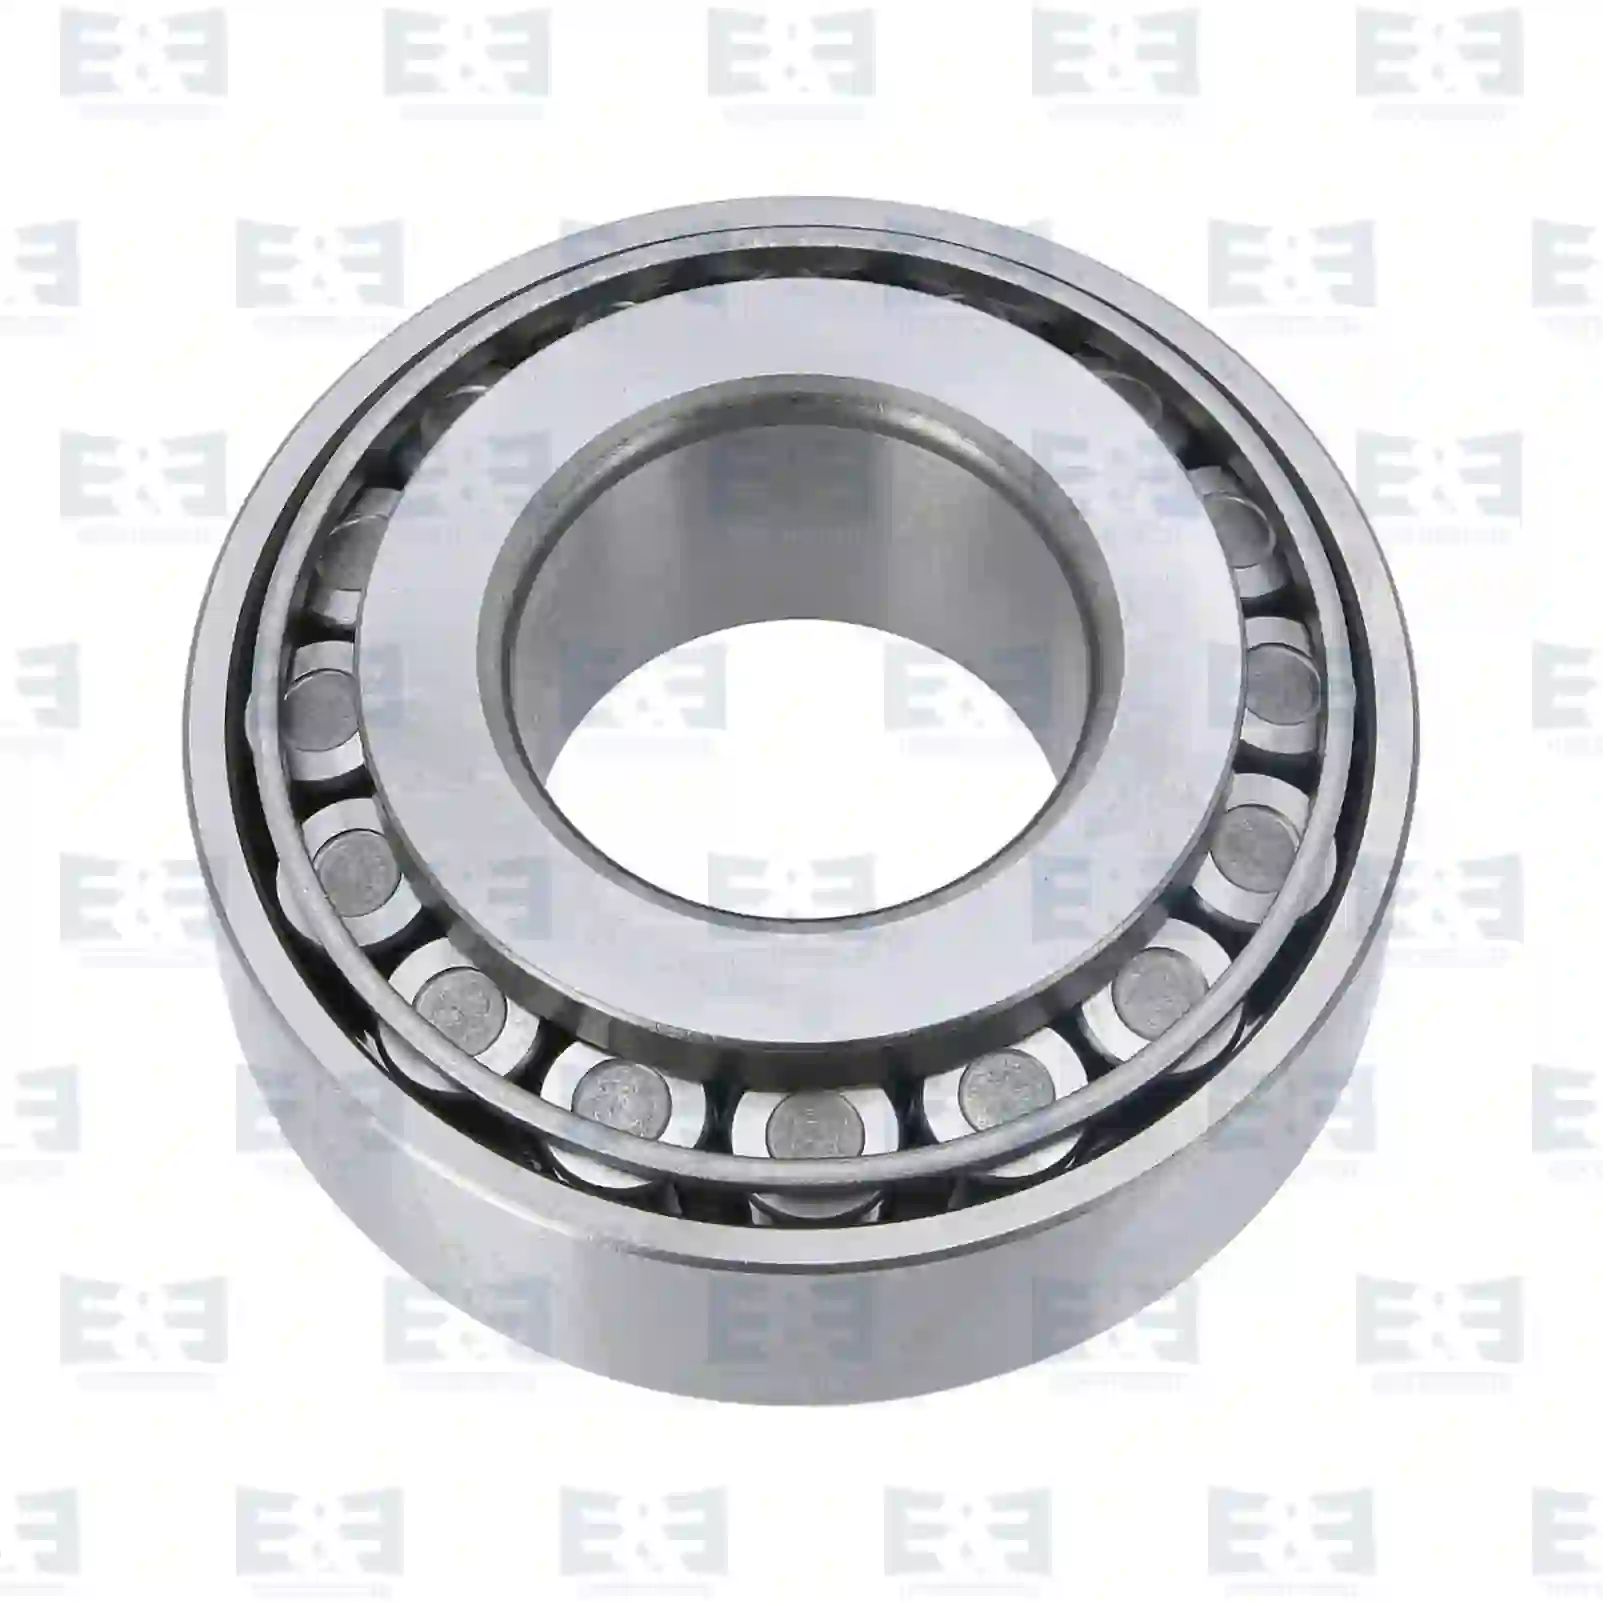 Tapered roller bearing, 2E2285917, 0275828, 275823, 275828, 01110020, 26800610, 988450103, 988450103A, 988450129, 988450129A, 26800610, 3612965000, 06324990017, 0009812005, 0069810805, 0069816905, 0069817405, 0109819305, 0345386000, 38326-90000, 0023432311, 0959532310, 0959532311, 5000022267, 4200003200, 14764, 178427, 179427, 11095, 183338, ZG02973-0008 ||  2E2285917 E&E Truck Spare Parts | Truck Spare Parts, Auotomotive Spare Parts Tapered roller bearing, 2E2285917, 0275828, 275823, 275828, 01110020, 26800610, 988450103, 988450103A, 988450129, 988450129A, 26800610, 3612965000, 06324990017, 0009812005, 0069810805, 0069816905, 0069817405, 0109819305, 0345386000, 38326-90000, 0023432311, 0959532310, 0959532311, 5000022267, 4200003200, 14764, 178427, 179427, 11095, 183338, ZG02973-0008 ||  2E2285917 E&E Truck Spare Parts | Truck Spare Parts, Auotomotive Spare Parts